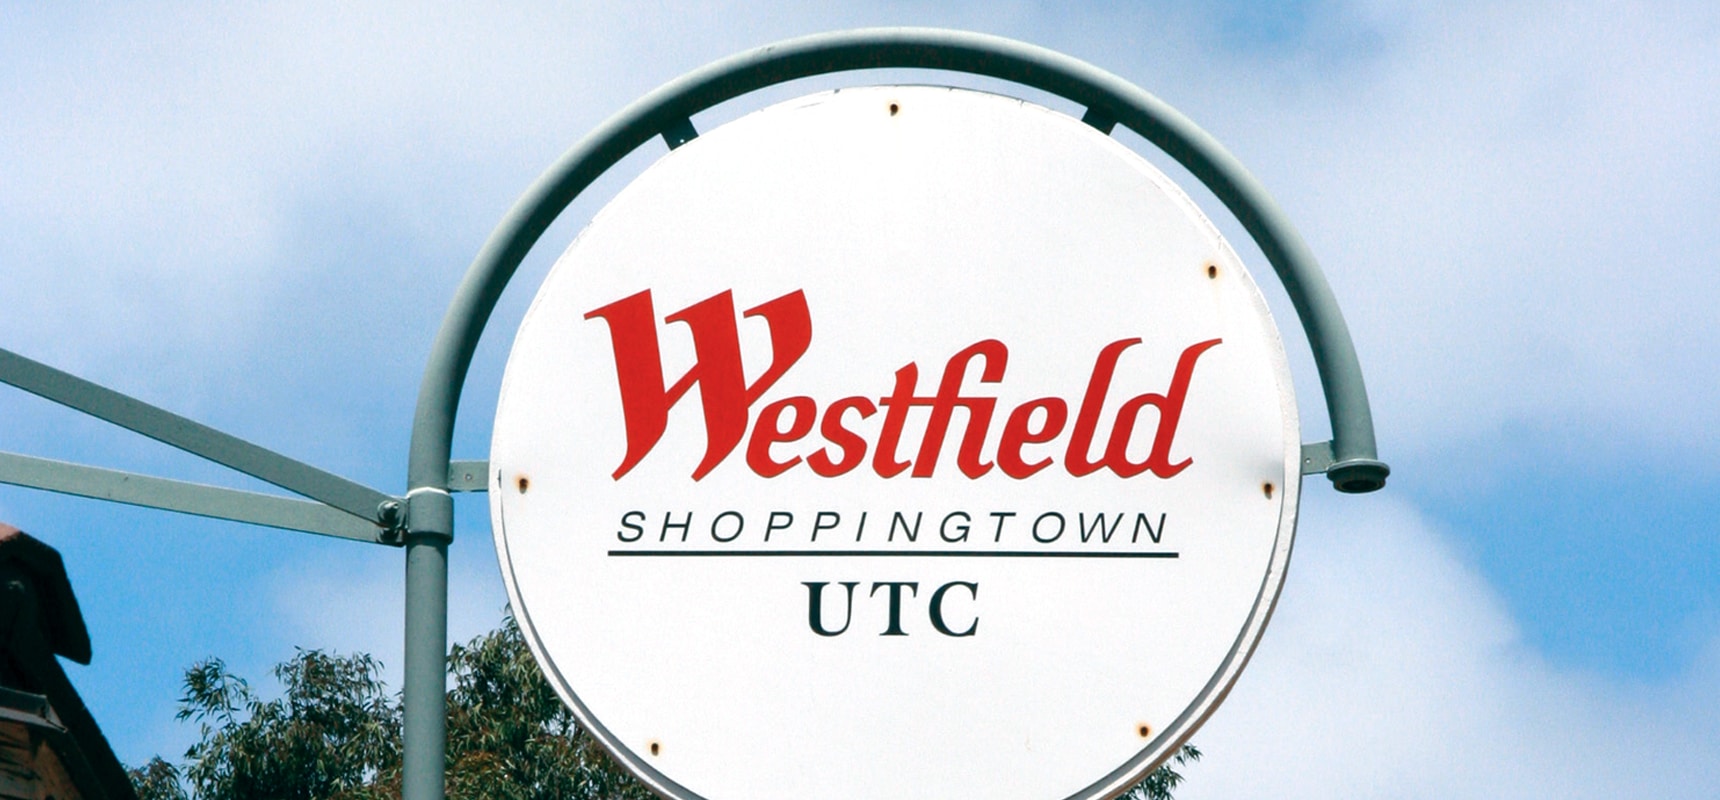 Here's what you can expect to find at Westfield UTC this October